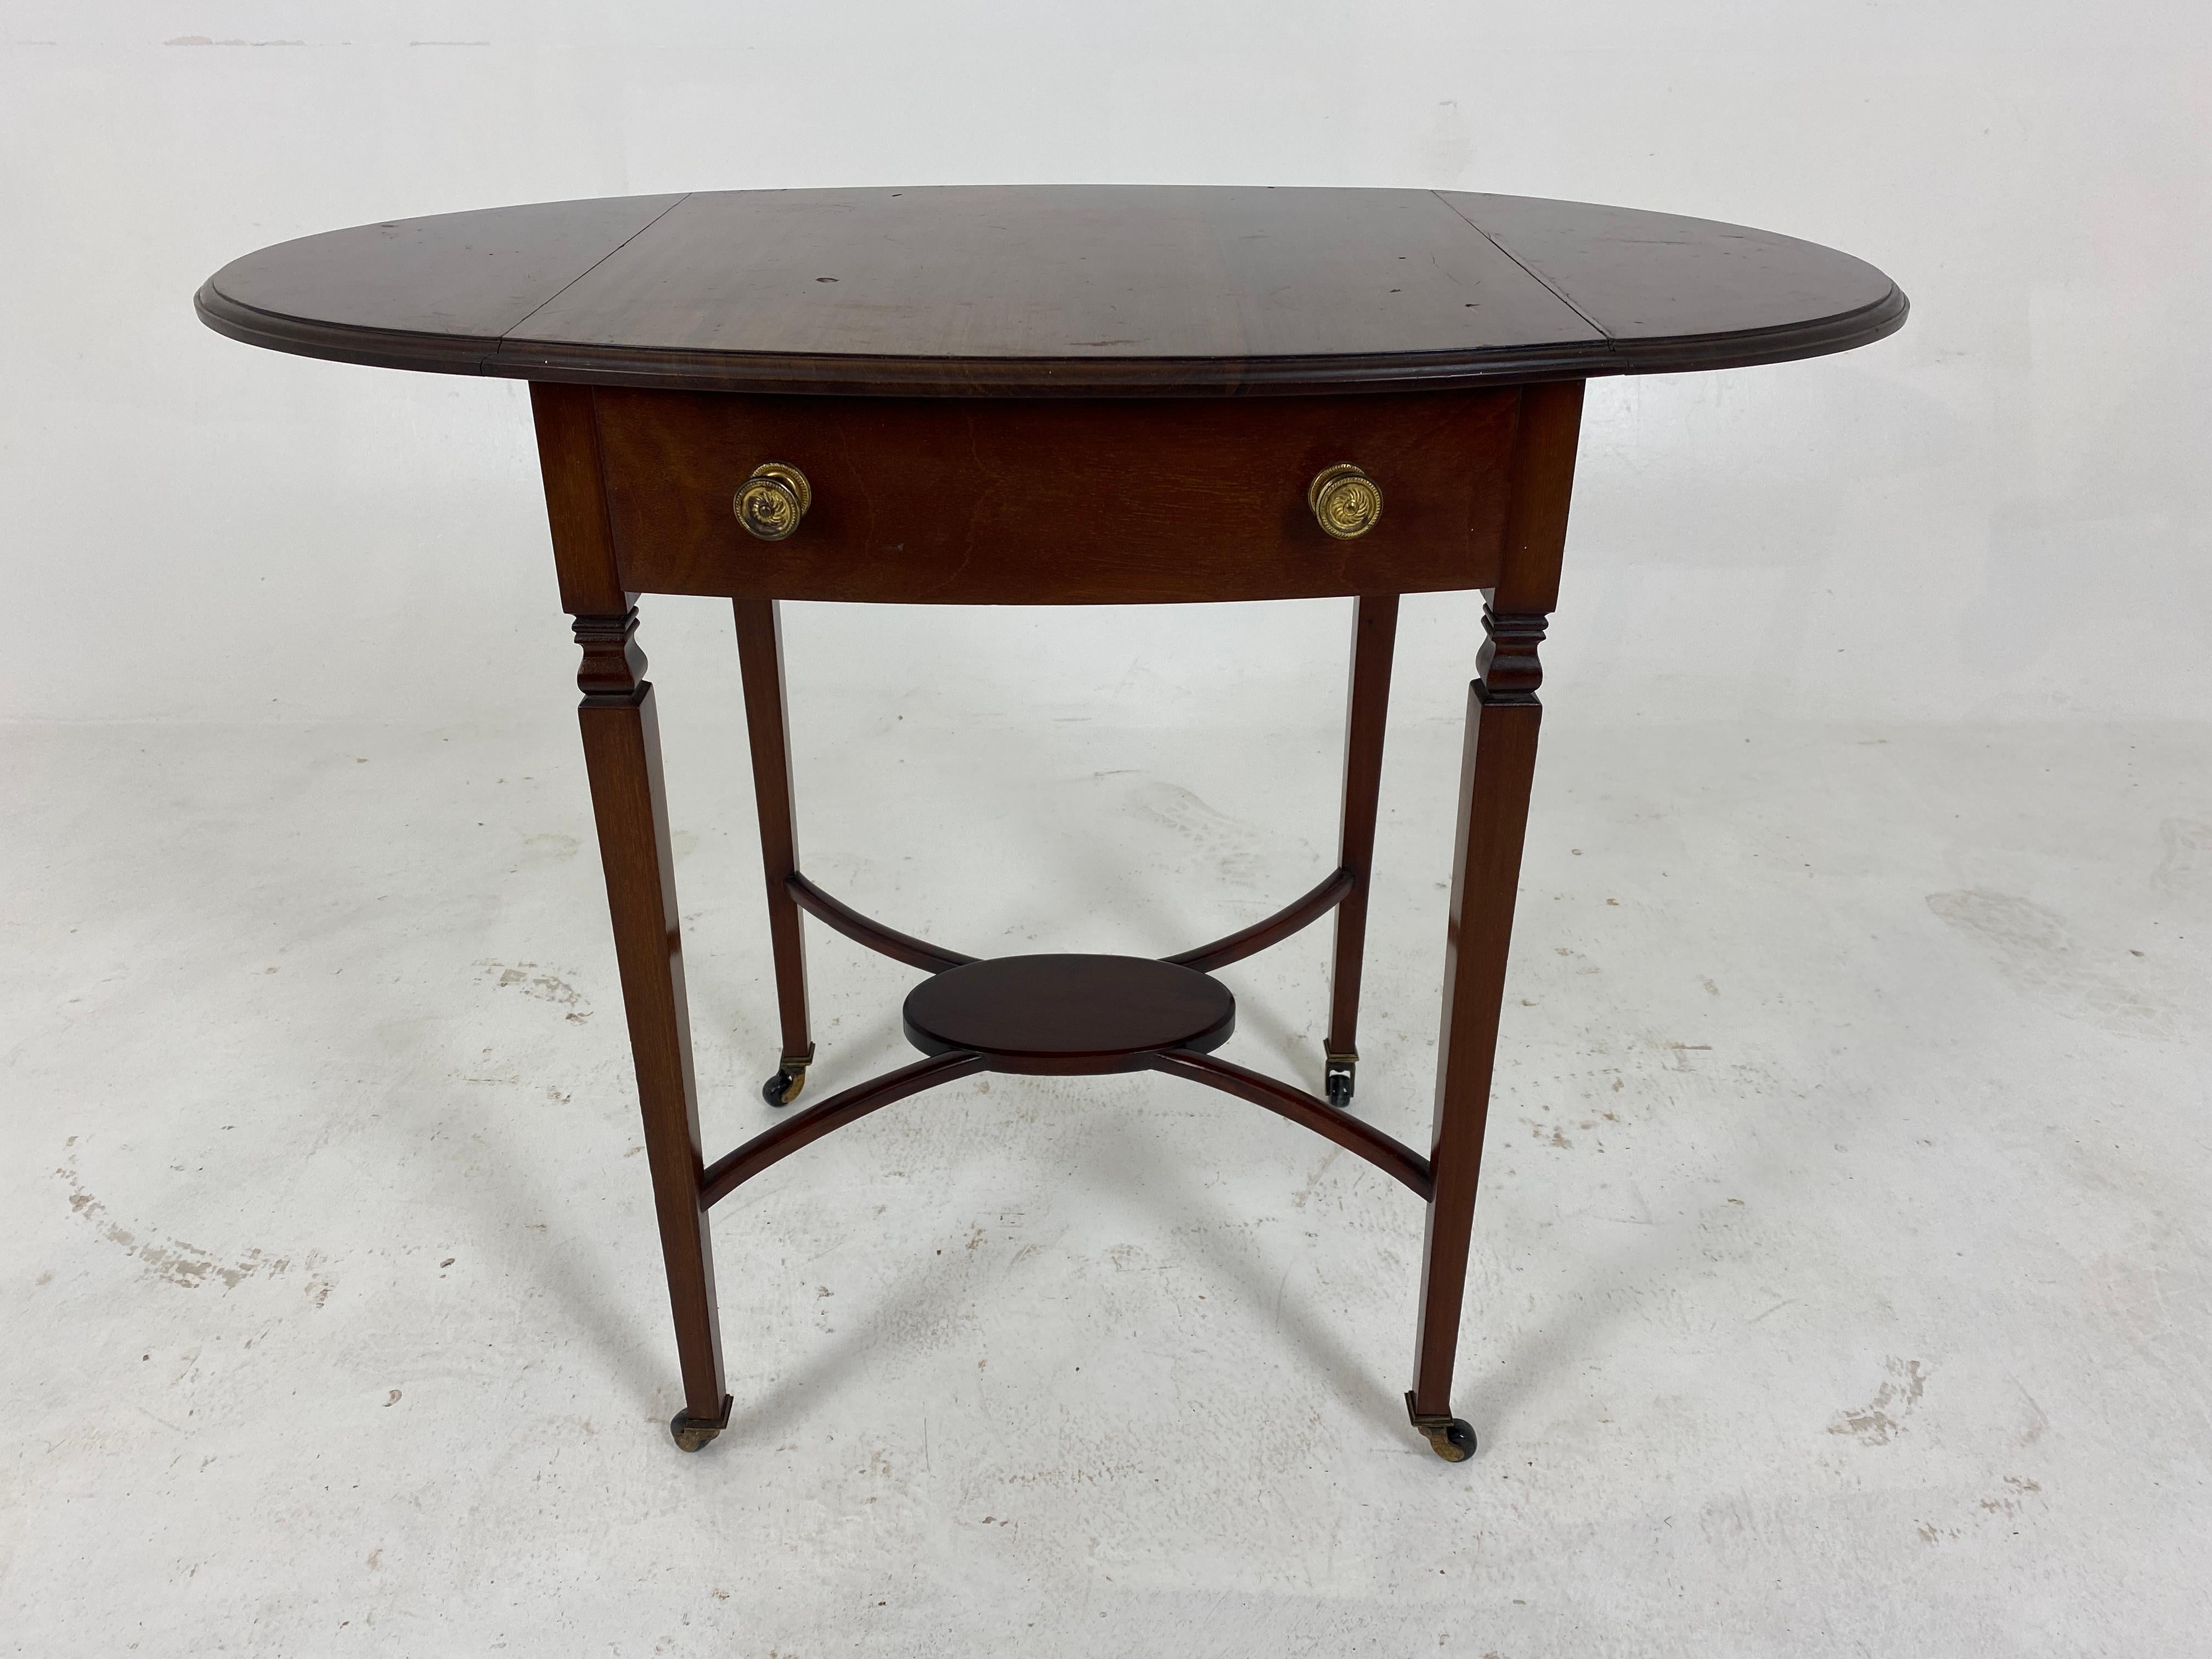 Ant. Walnut Drop Leaf Gateleg table with drawer, Scotland 1920, H706

Scotland 1920
Solid Walnut
Original Finish
Moulded top with bow fronts
Single dovetailed drawer and original brass pulls
Pair of oval shaped leaves to the side
Standing on